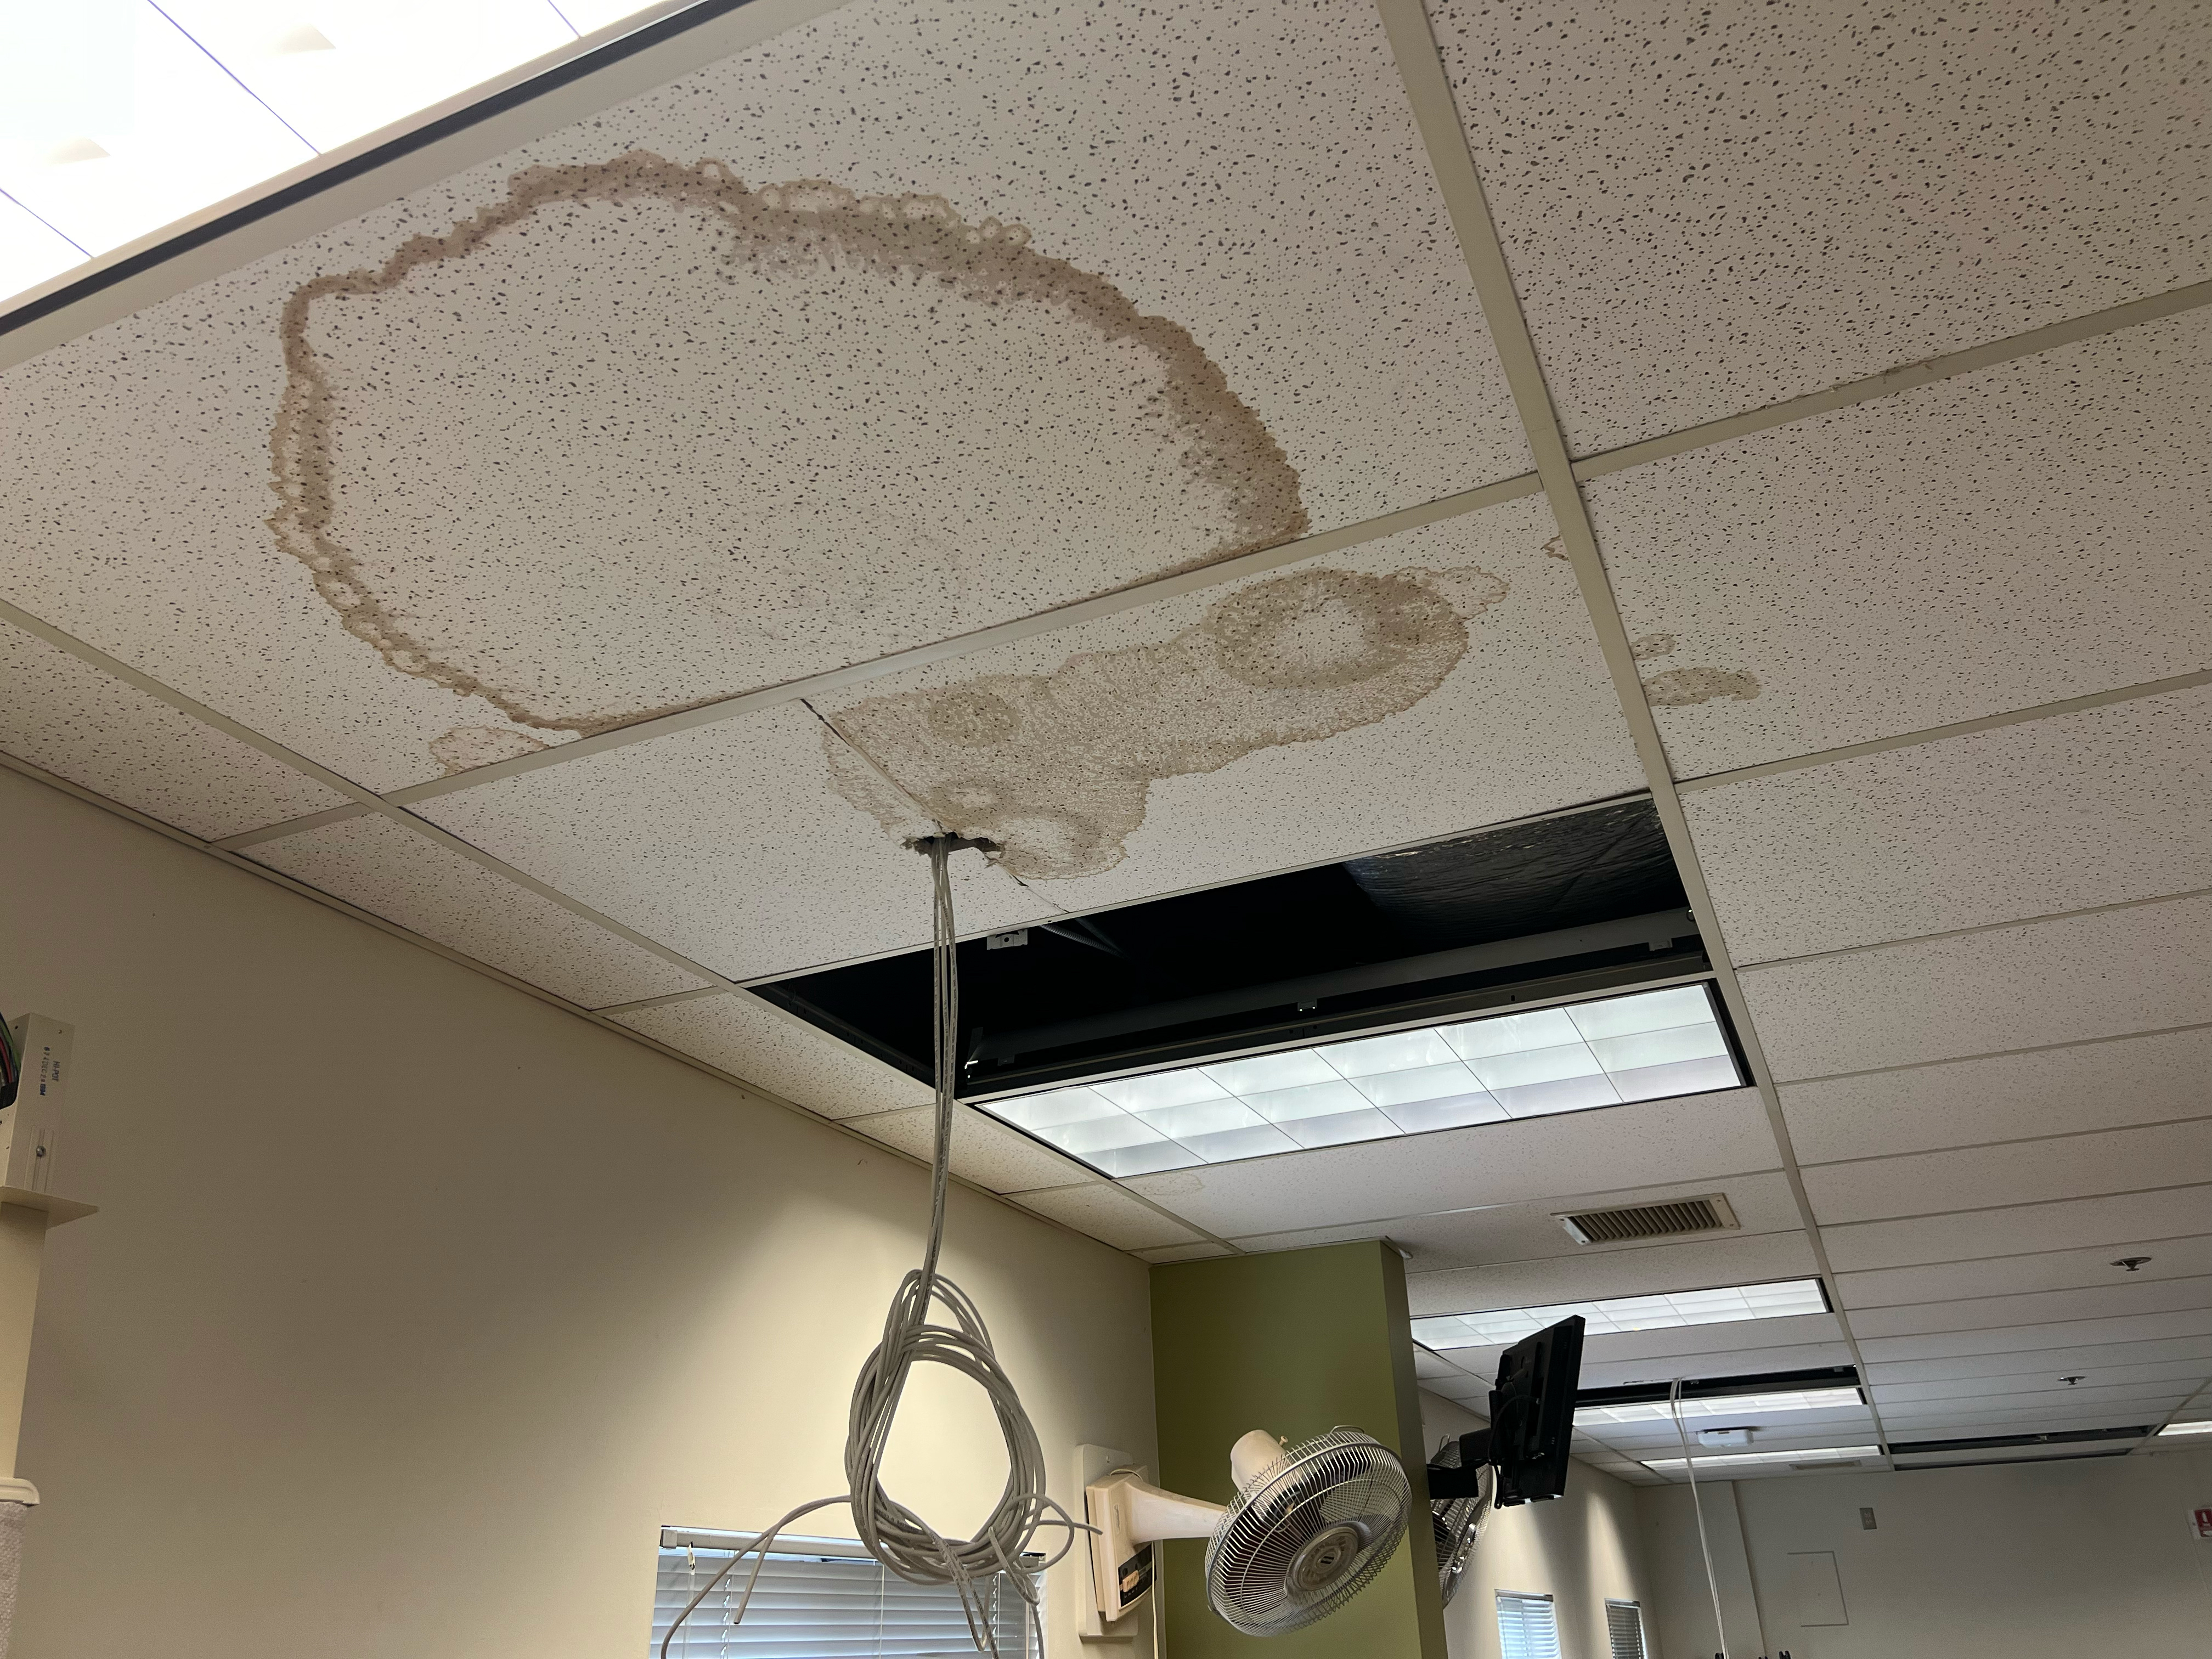 A photo taken by a logistics staffer shows a brown water stained ceiling. According to Douglas Galuszka, chief of logistics who provided the photo dated April 24, 2023, it was taken in Building 18 on the Veterans Affairs Puget Sound Health Care System campus. (Courtesy of Douglas Galuszka)